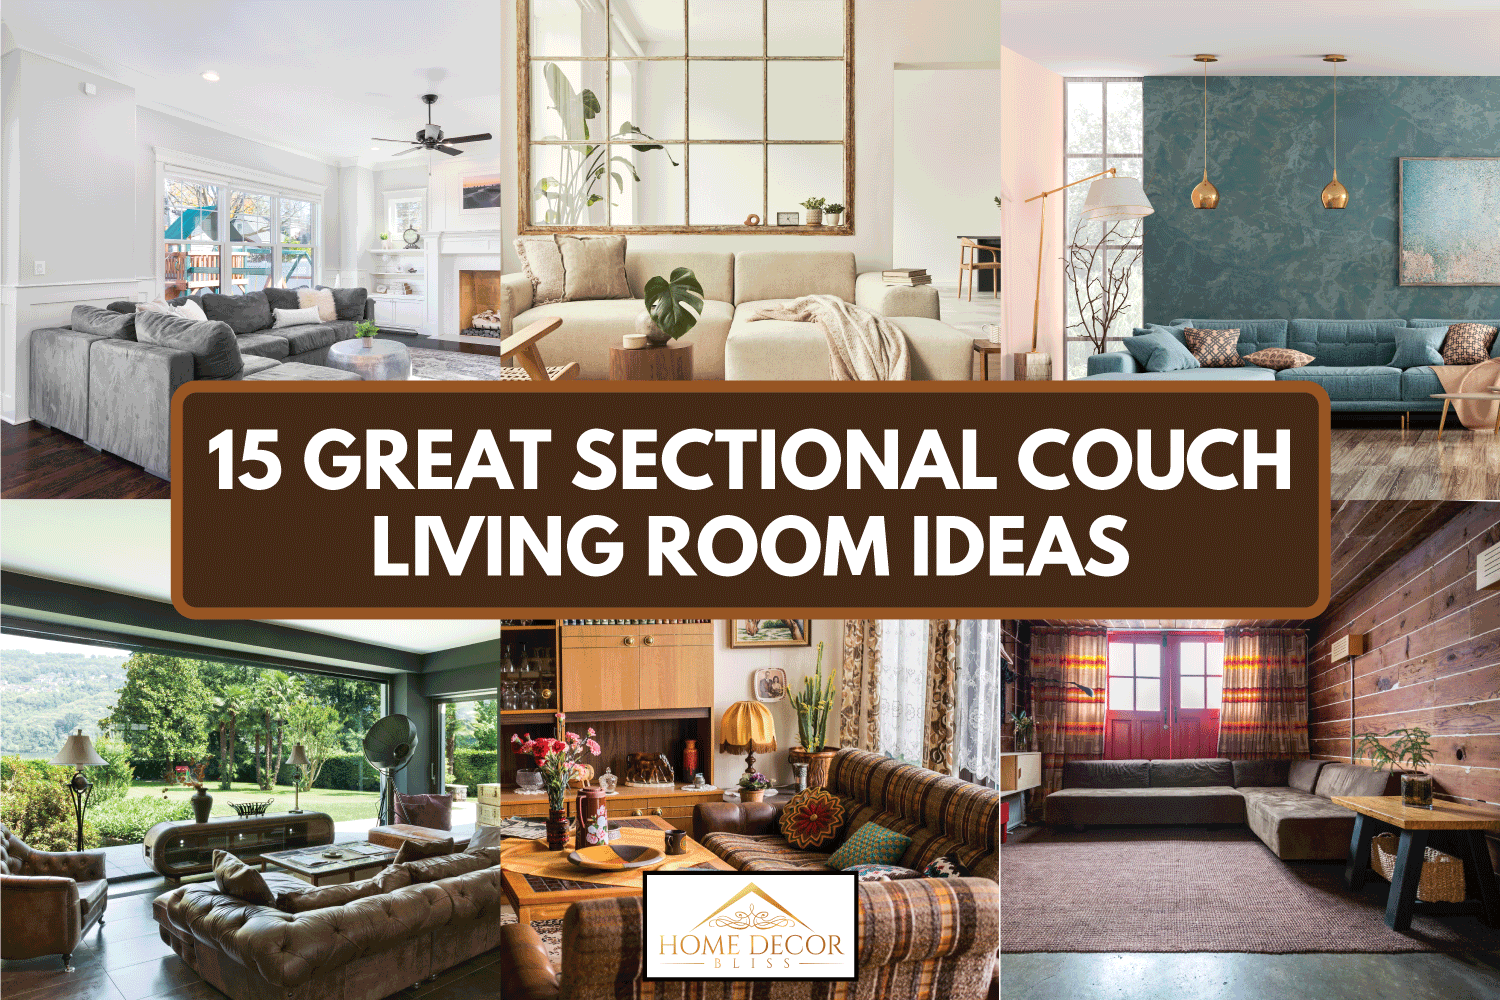 assorted images of sectional couches and sofas in living rooms. 15 Great Sectional Couch Living Room Ideas